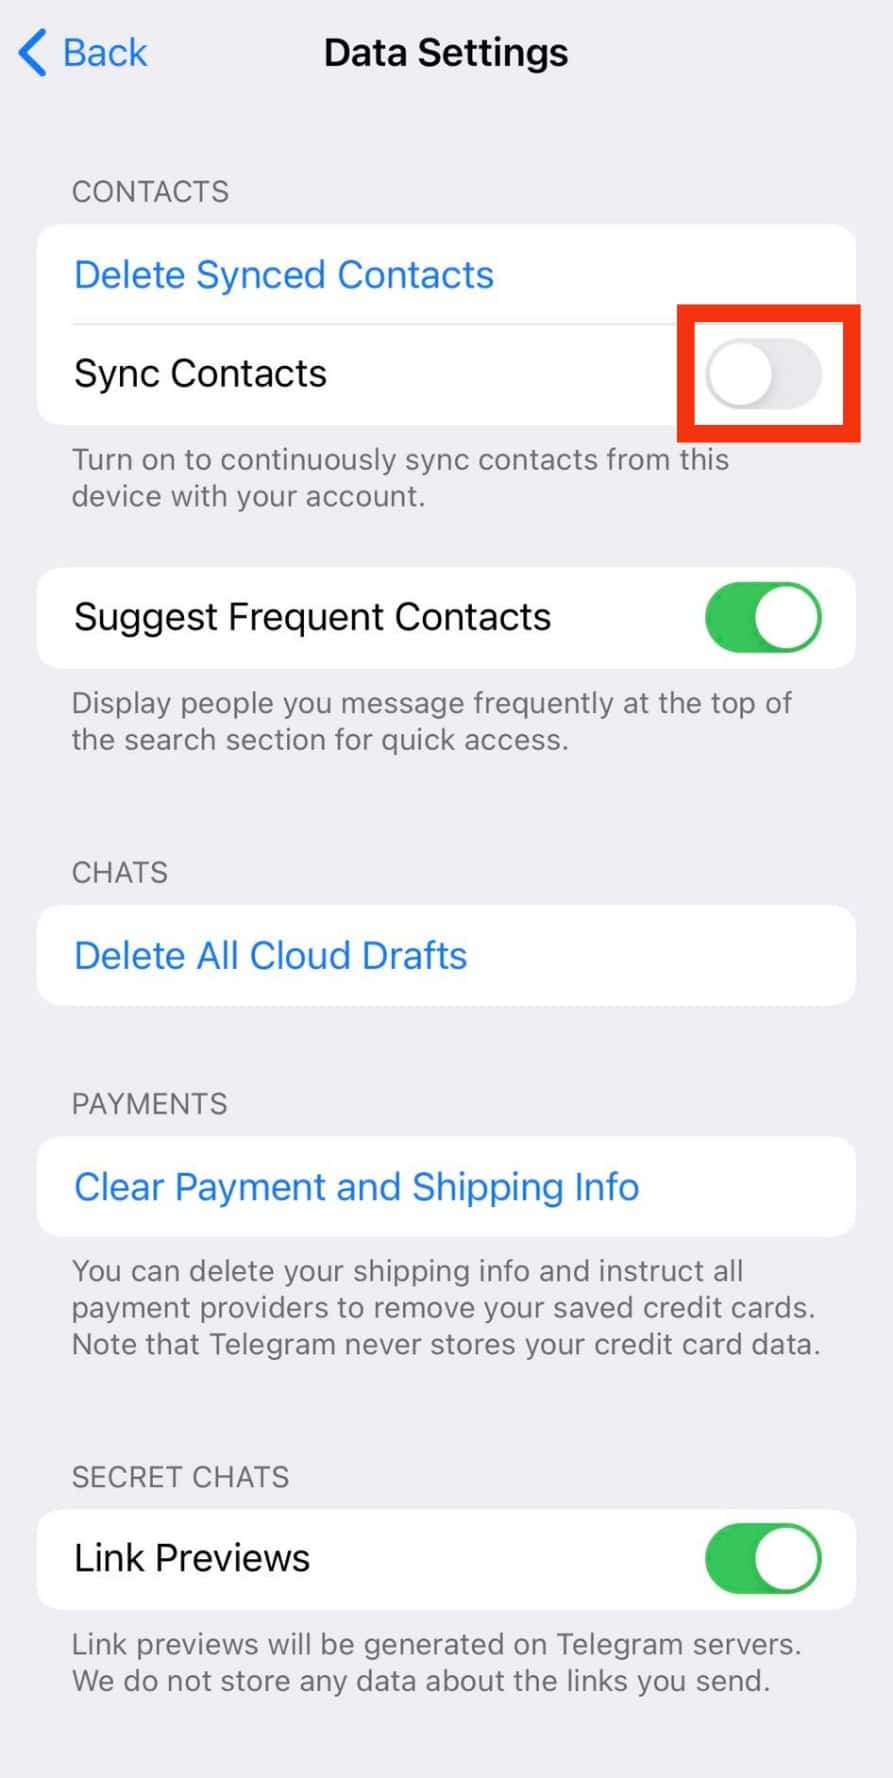 Find The Option For Sync Contacts And Turn It Off.